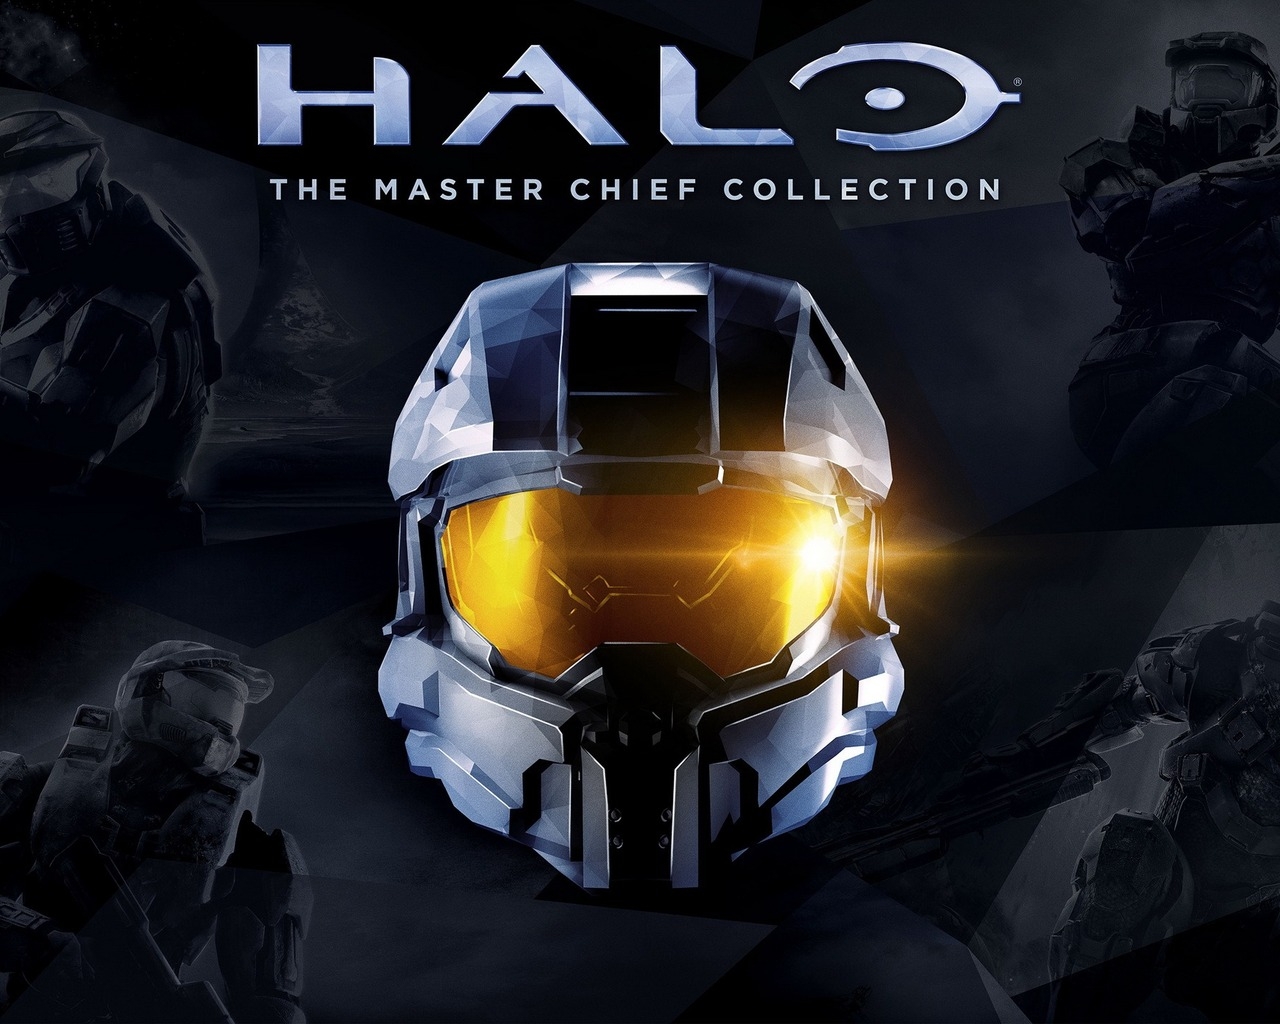 Halo the Master Chief Collection for 1280 x 1024 resolution